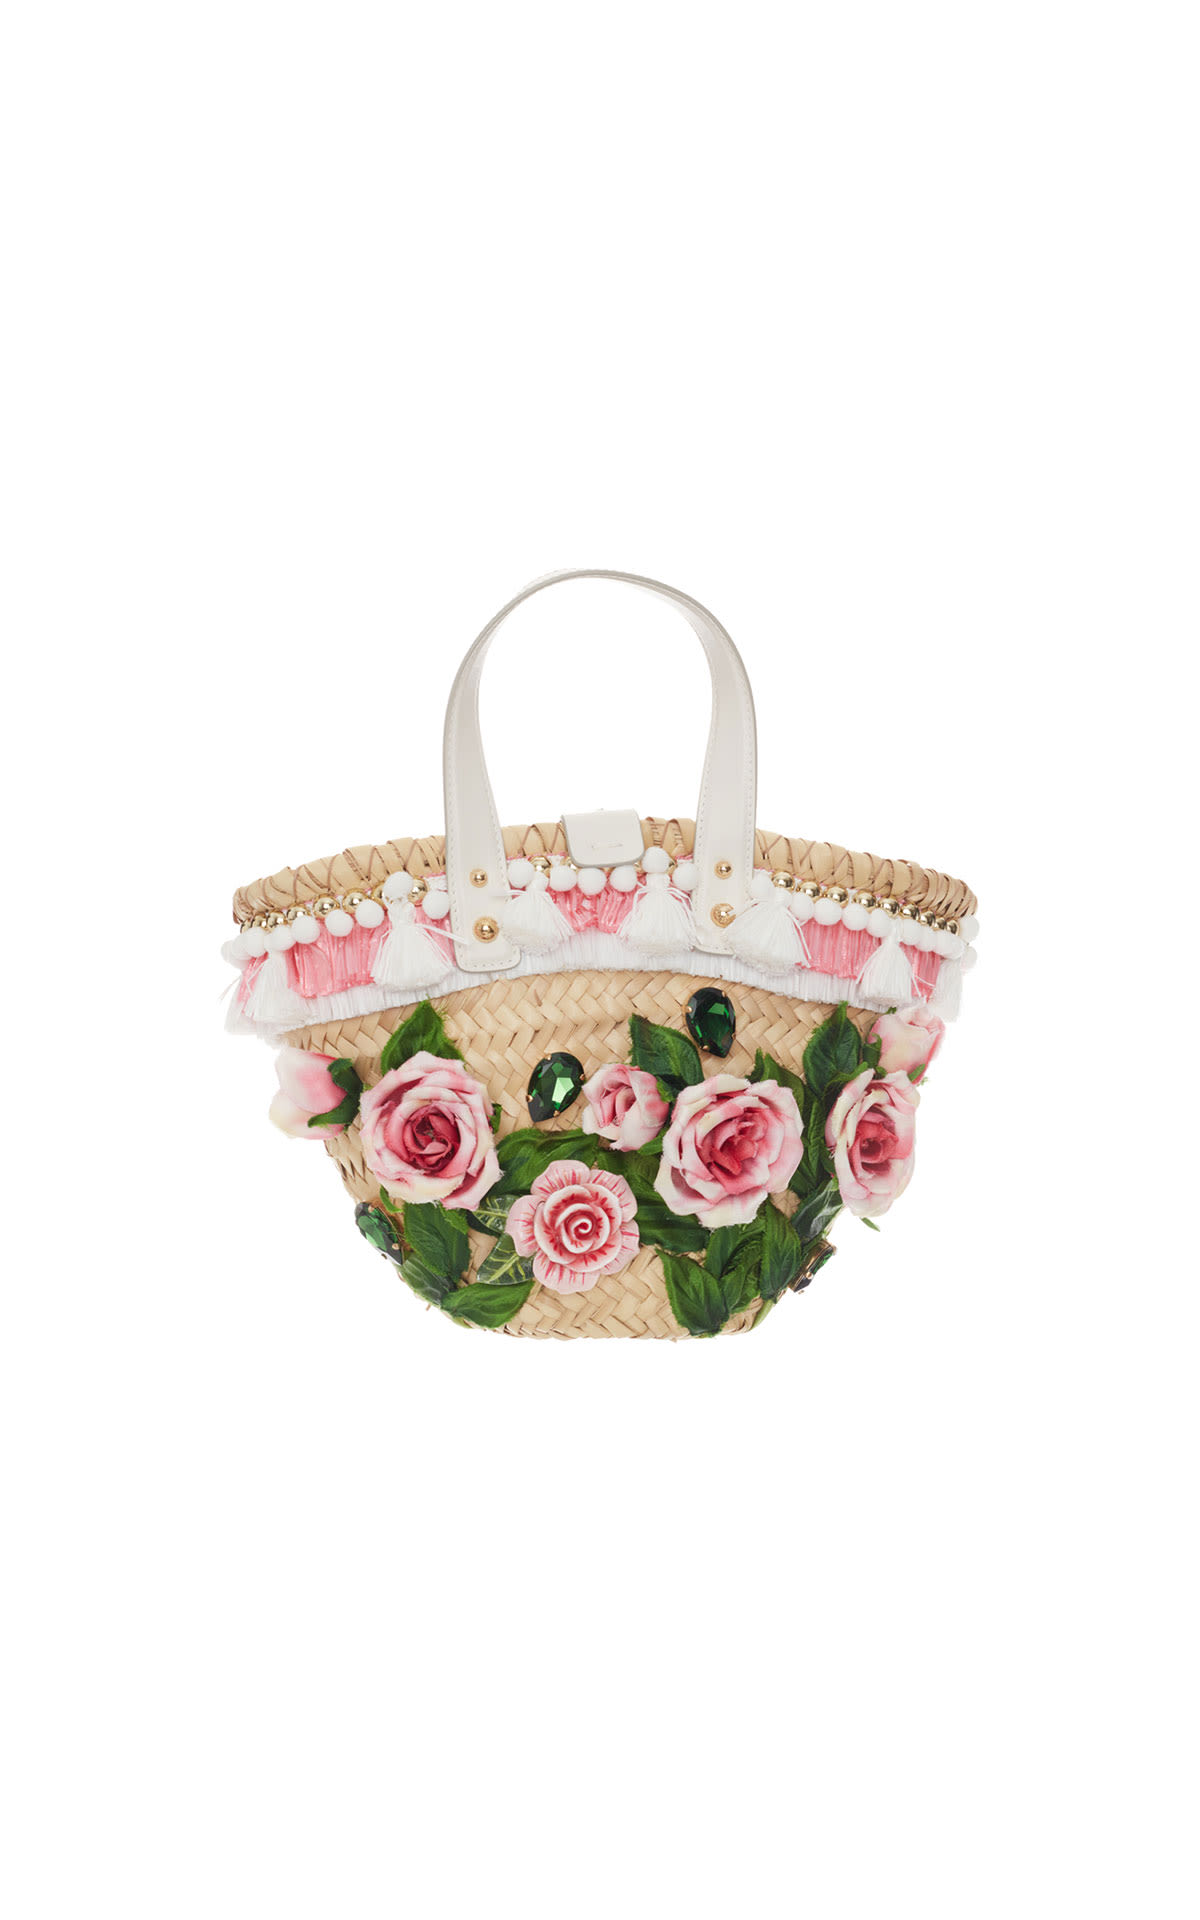 Dolce & Gabbana Roses straw bag from Bicester Village